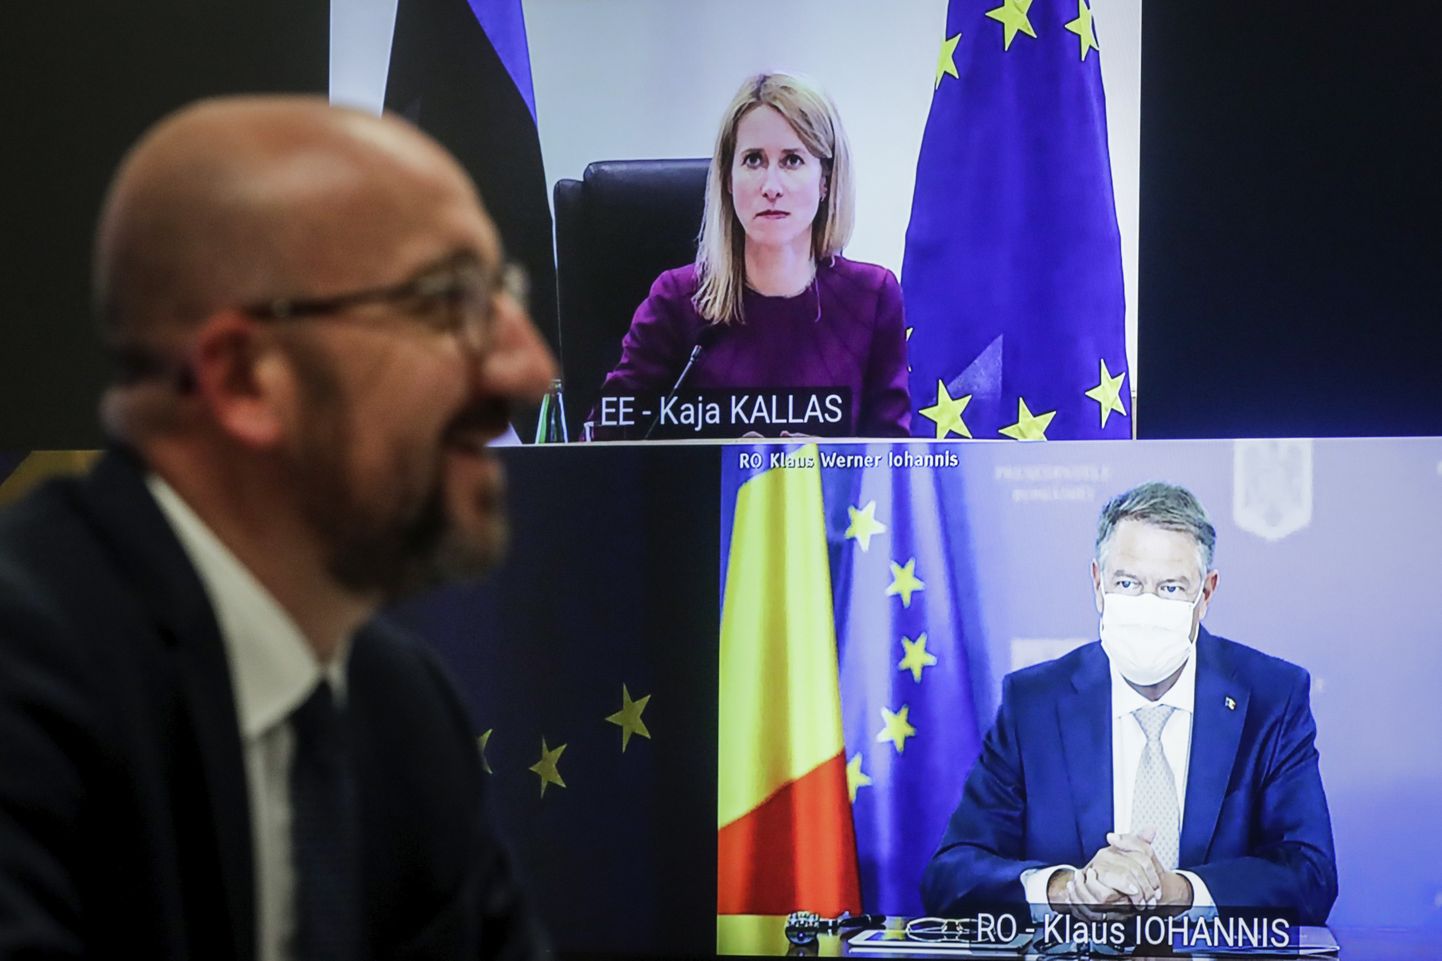 European Council President Charles Michel, left, speaks Estonia's Prime Minister Kaja Kallas and Romania's President Klaus Werner Ioannis during a meeting via video link at the European Council building in Brussels, Wednesday, May 19, 2021. European Council President Charles Michel is meeting with EU leaders via video link to prepare for an upcoming EU summit which begins on Monday. (Stephanie Lecocq, Pool via AP)